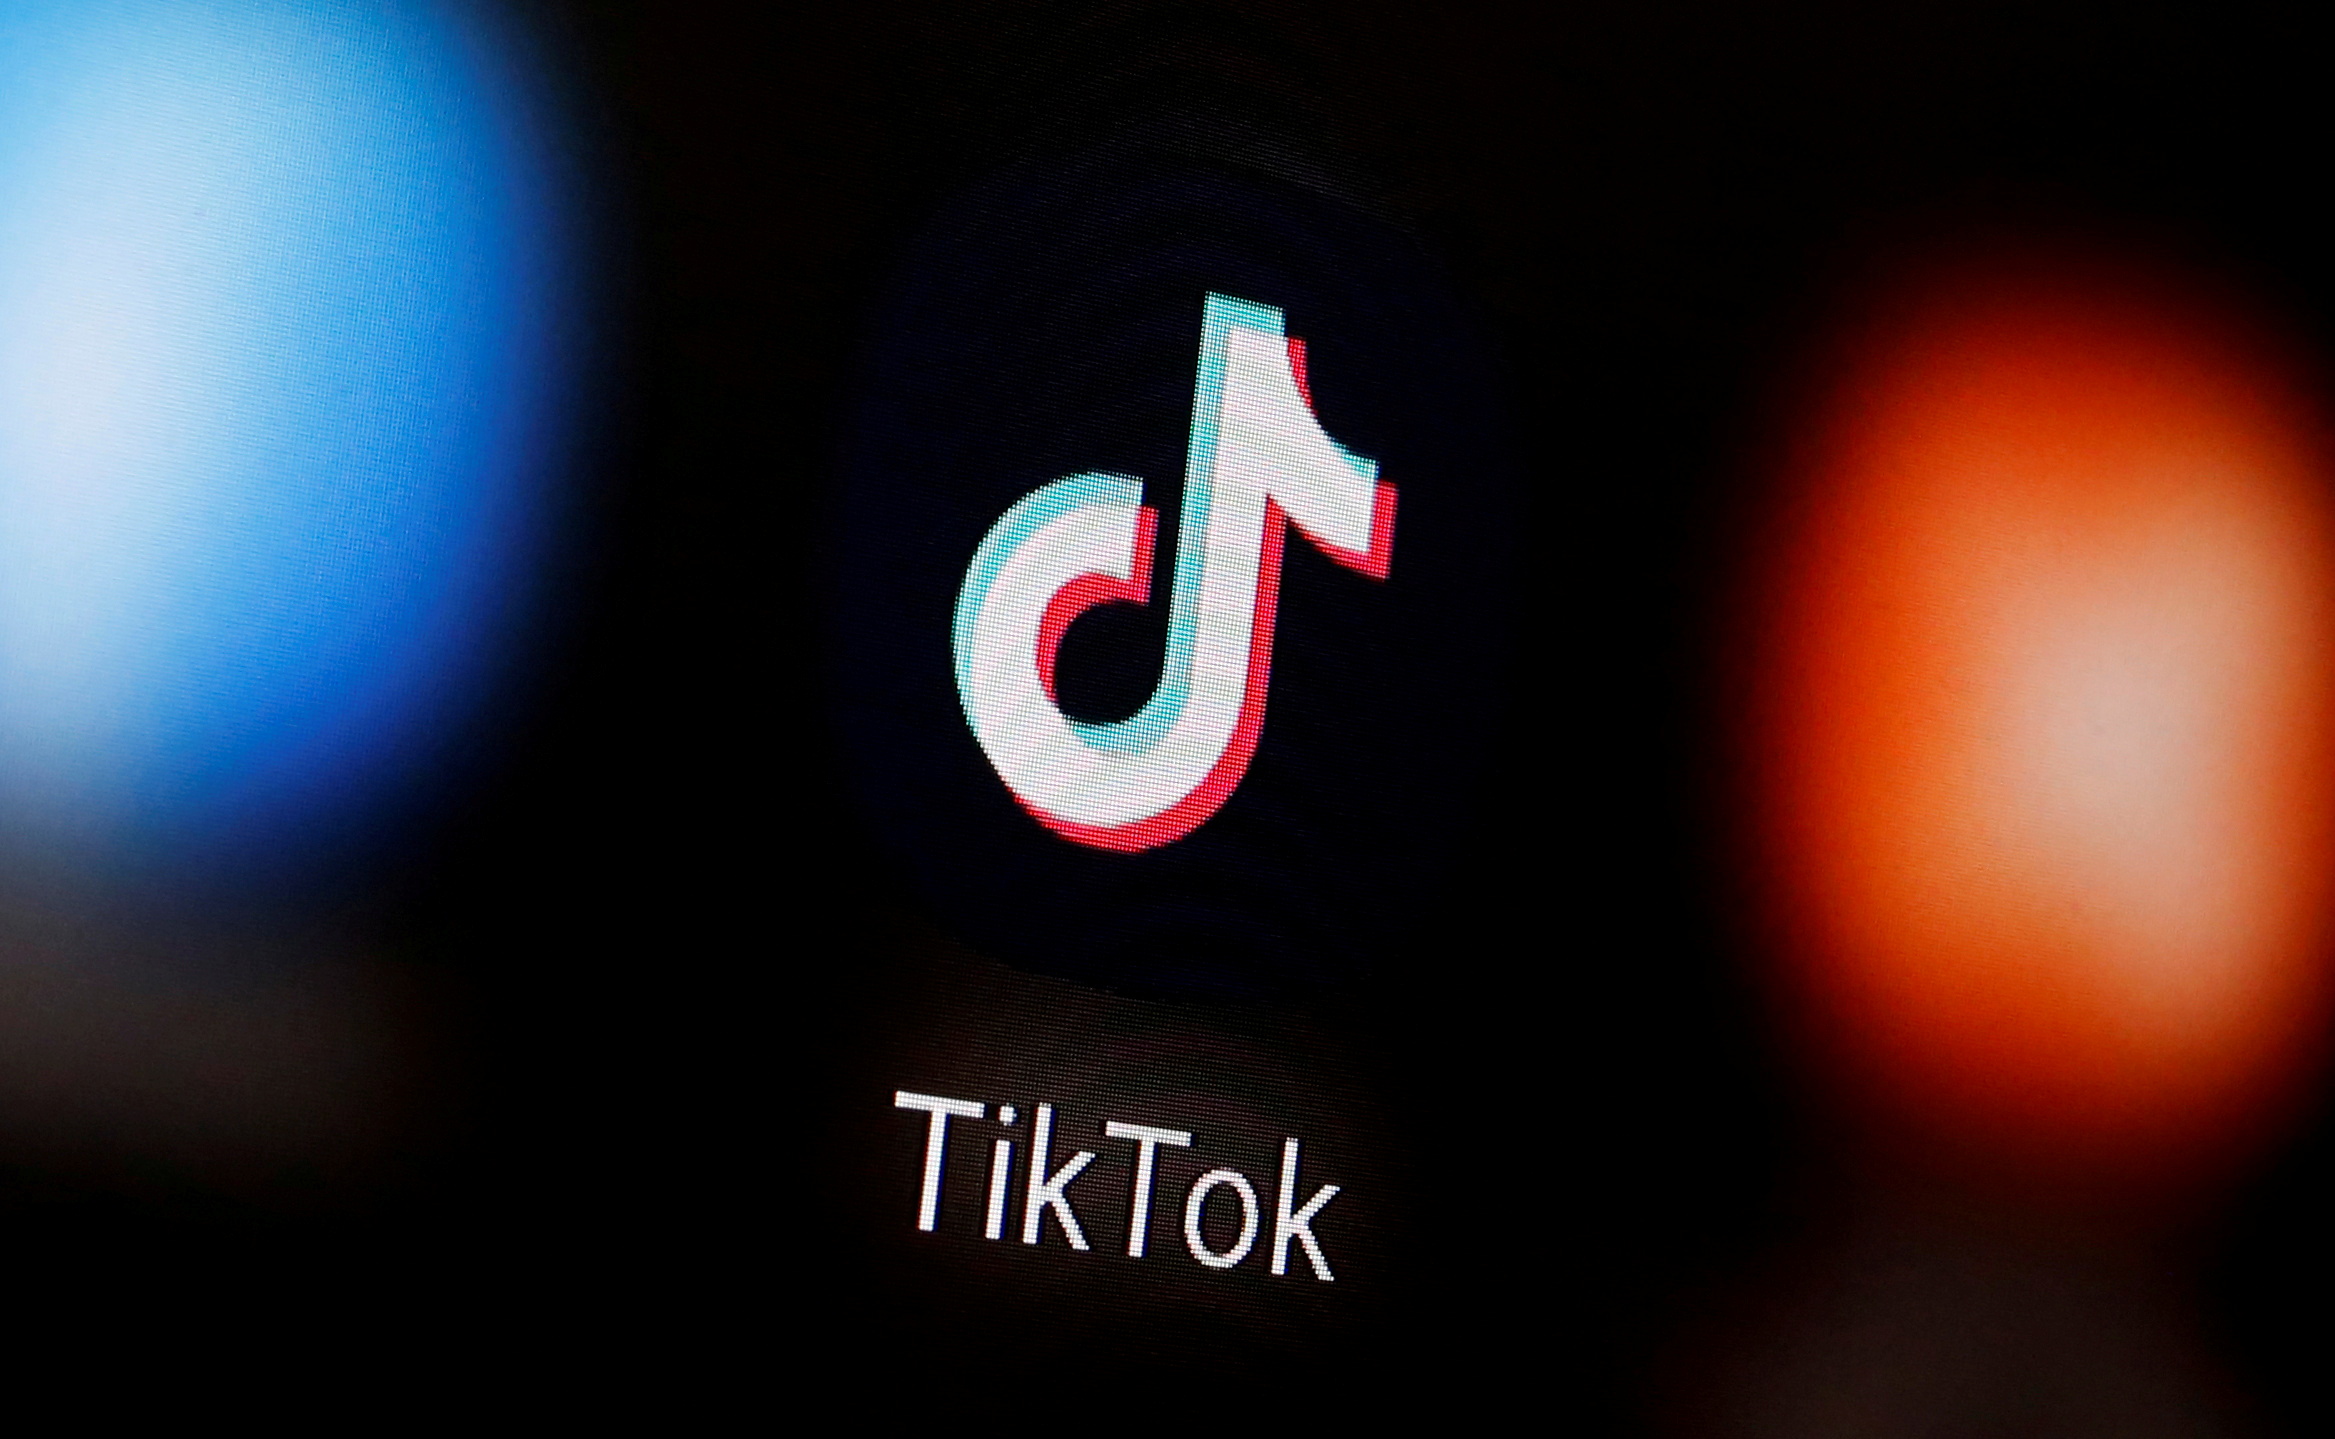 A TikTok logo is displayed on a smartphone in this illustration taken January 6, 2020. REUTERS/Dado Ruvic/Illustration